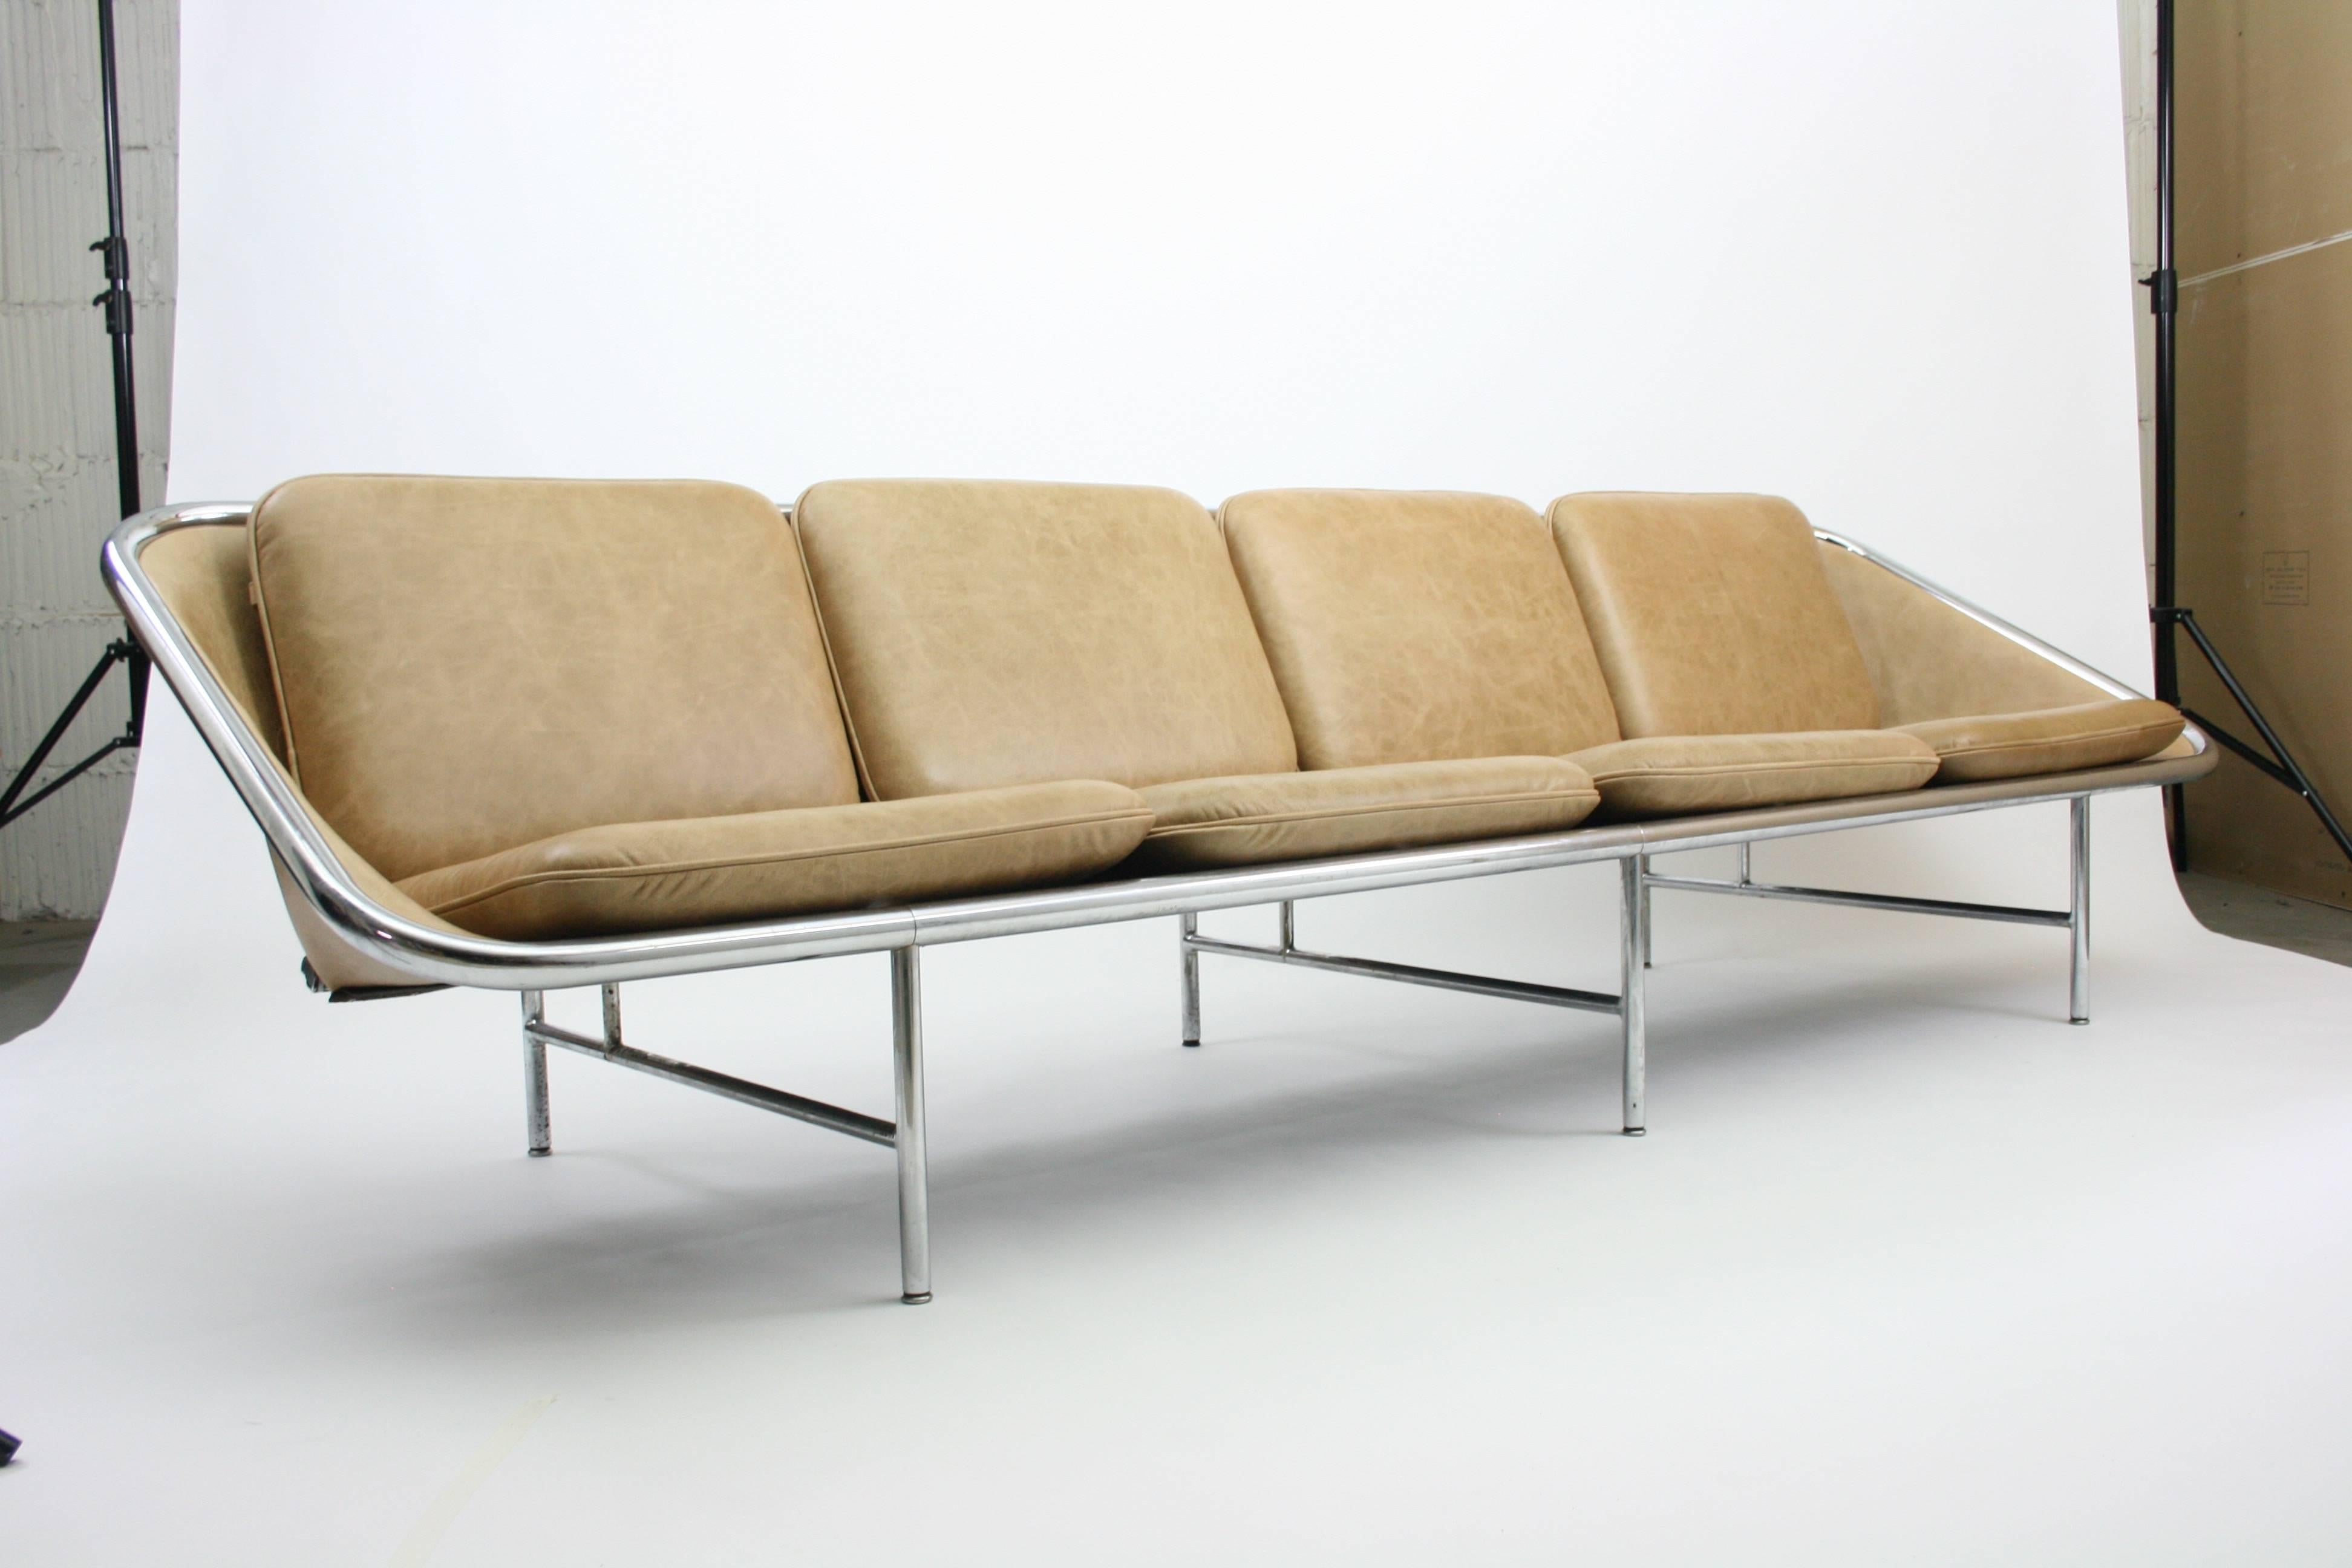 Steel 4 Seater George Nelson 'Sling' Sofa in Leather